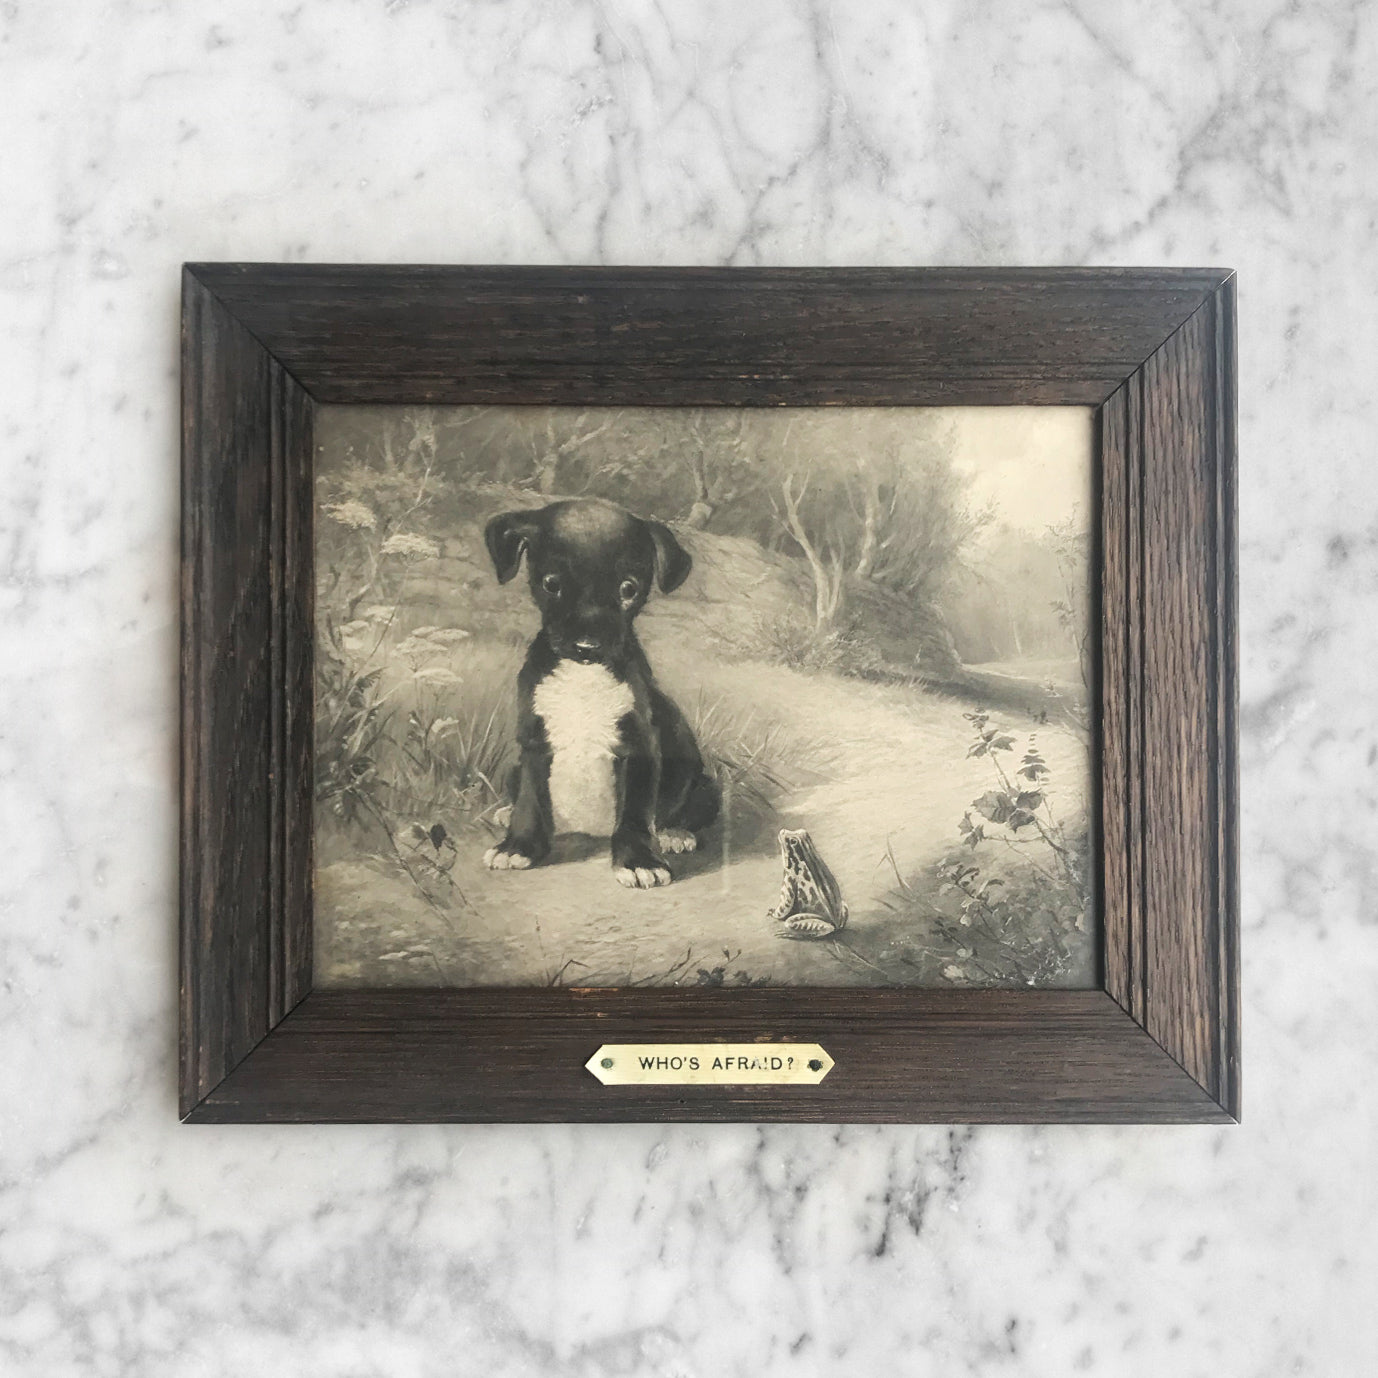 Titled 'Who's afraid?' this charming black and white print of a Dog and his Froggy pal will keep you guessing! SHOP NOW - www.intovintage.co.uk